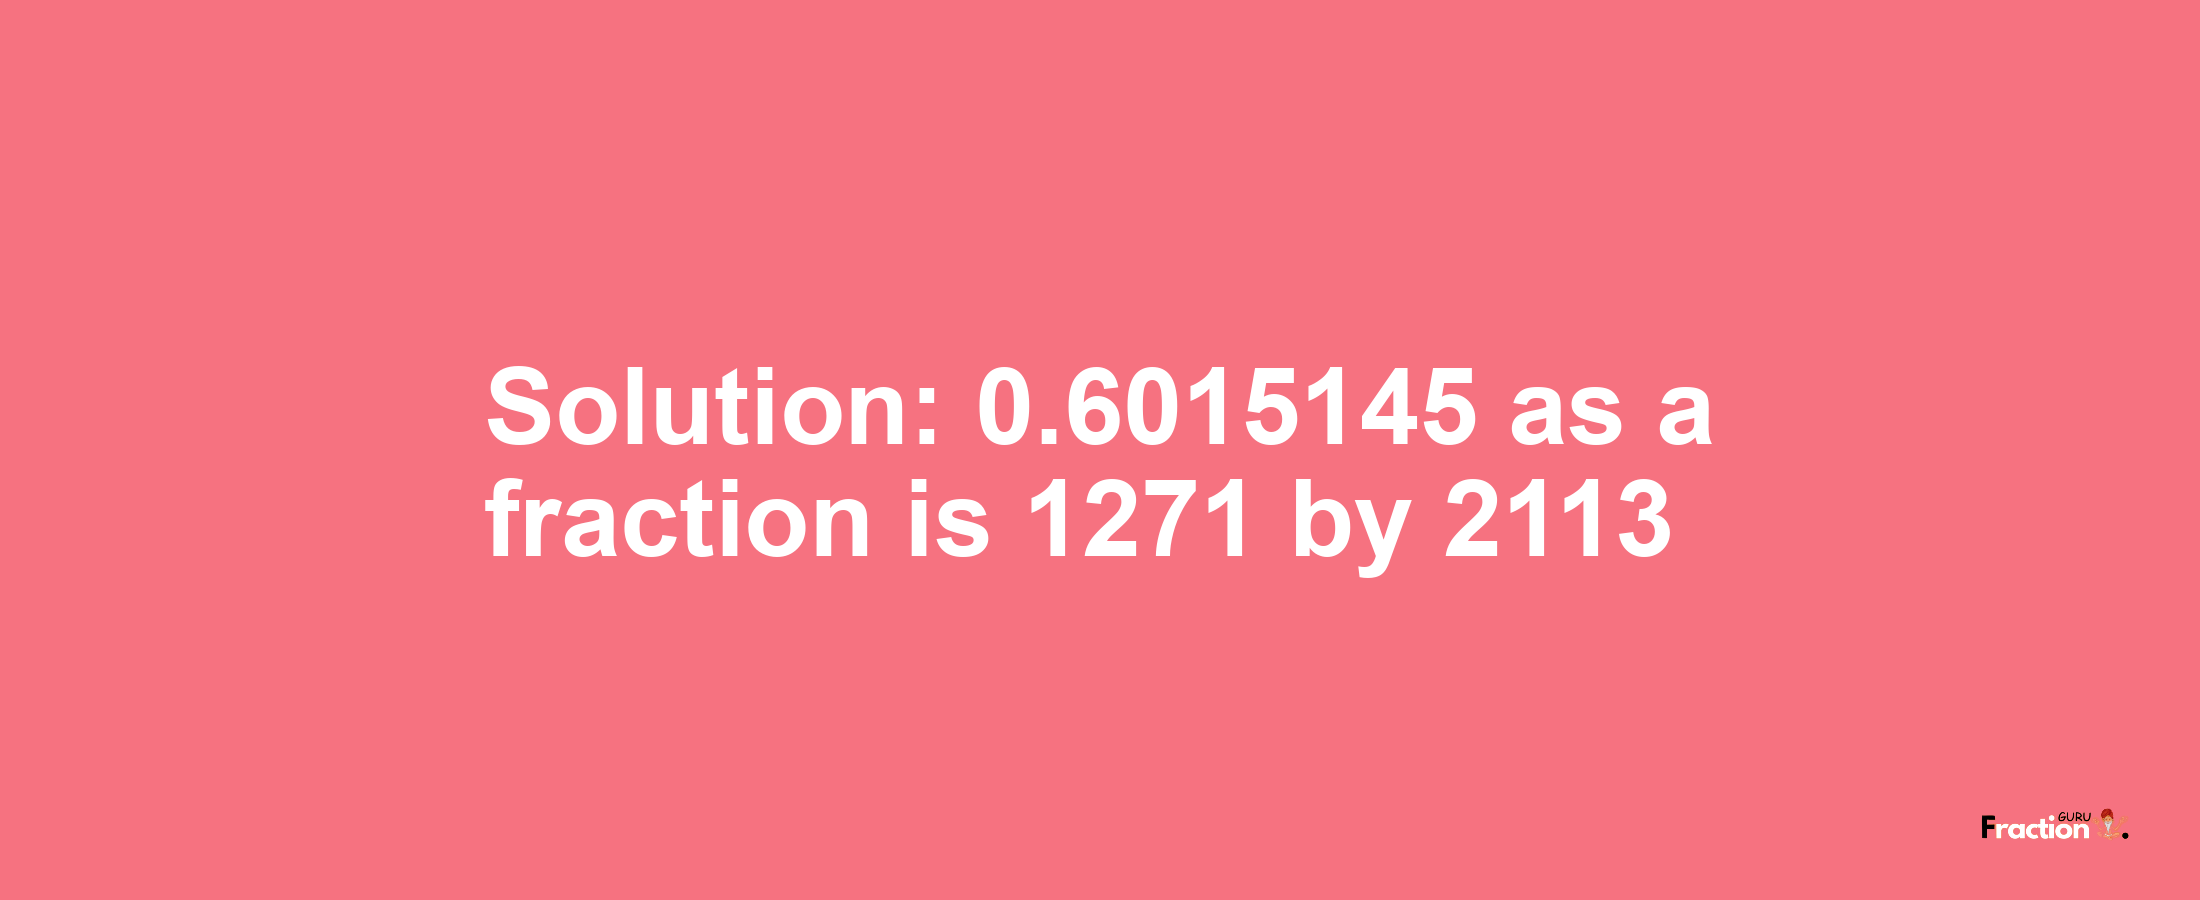 Solution:0.6015145 as a fraction is 1271/2113